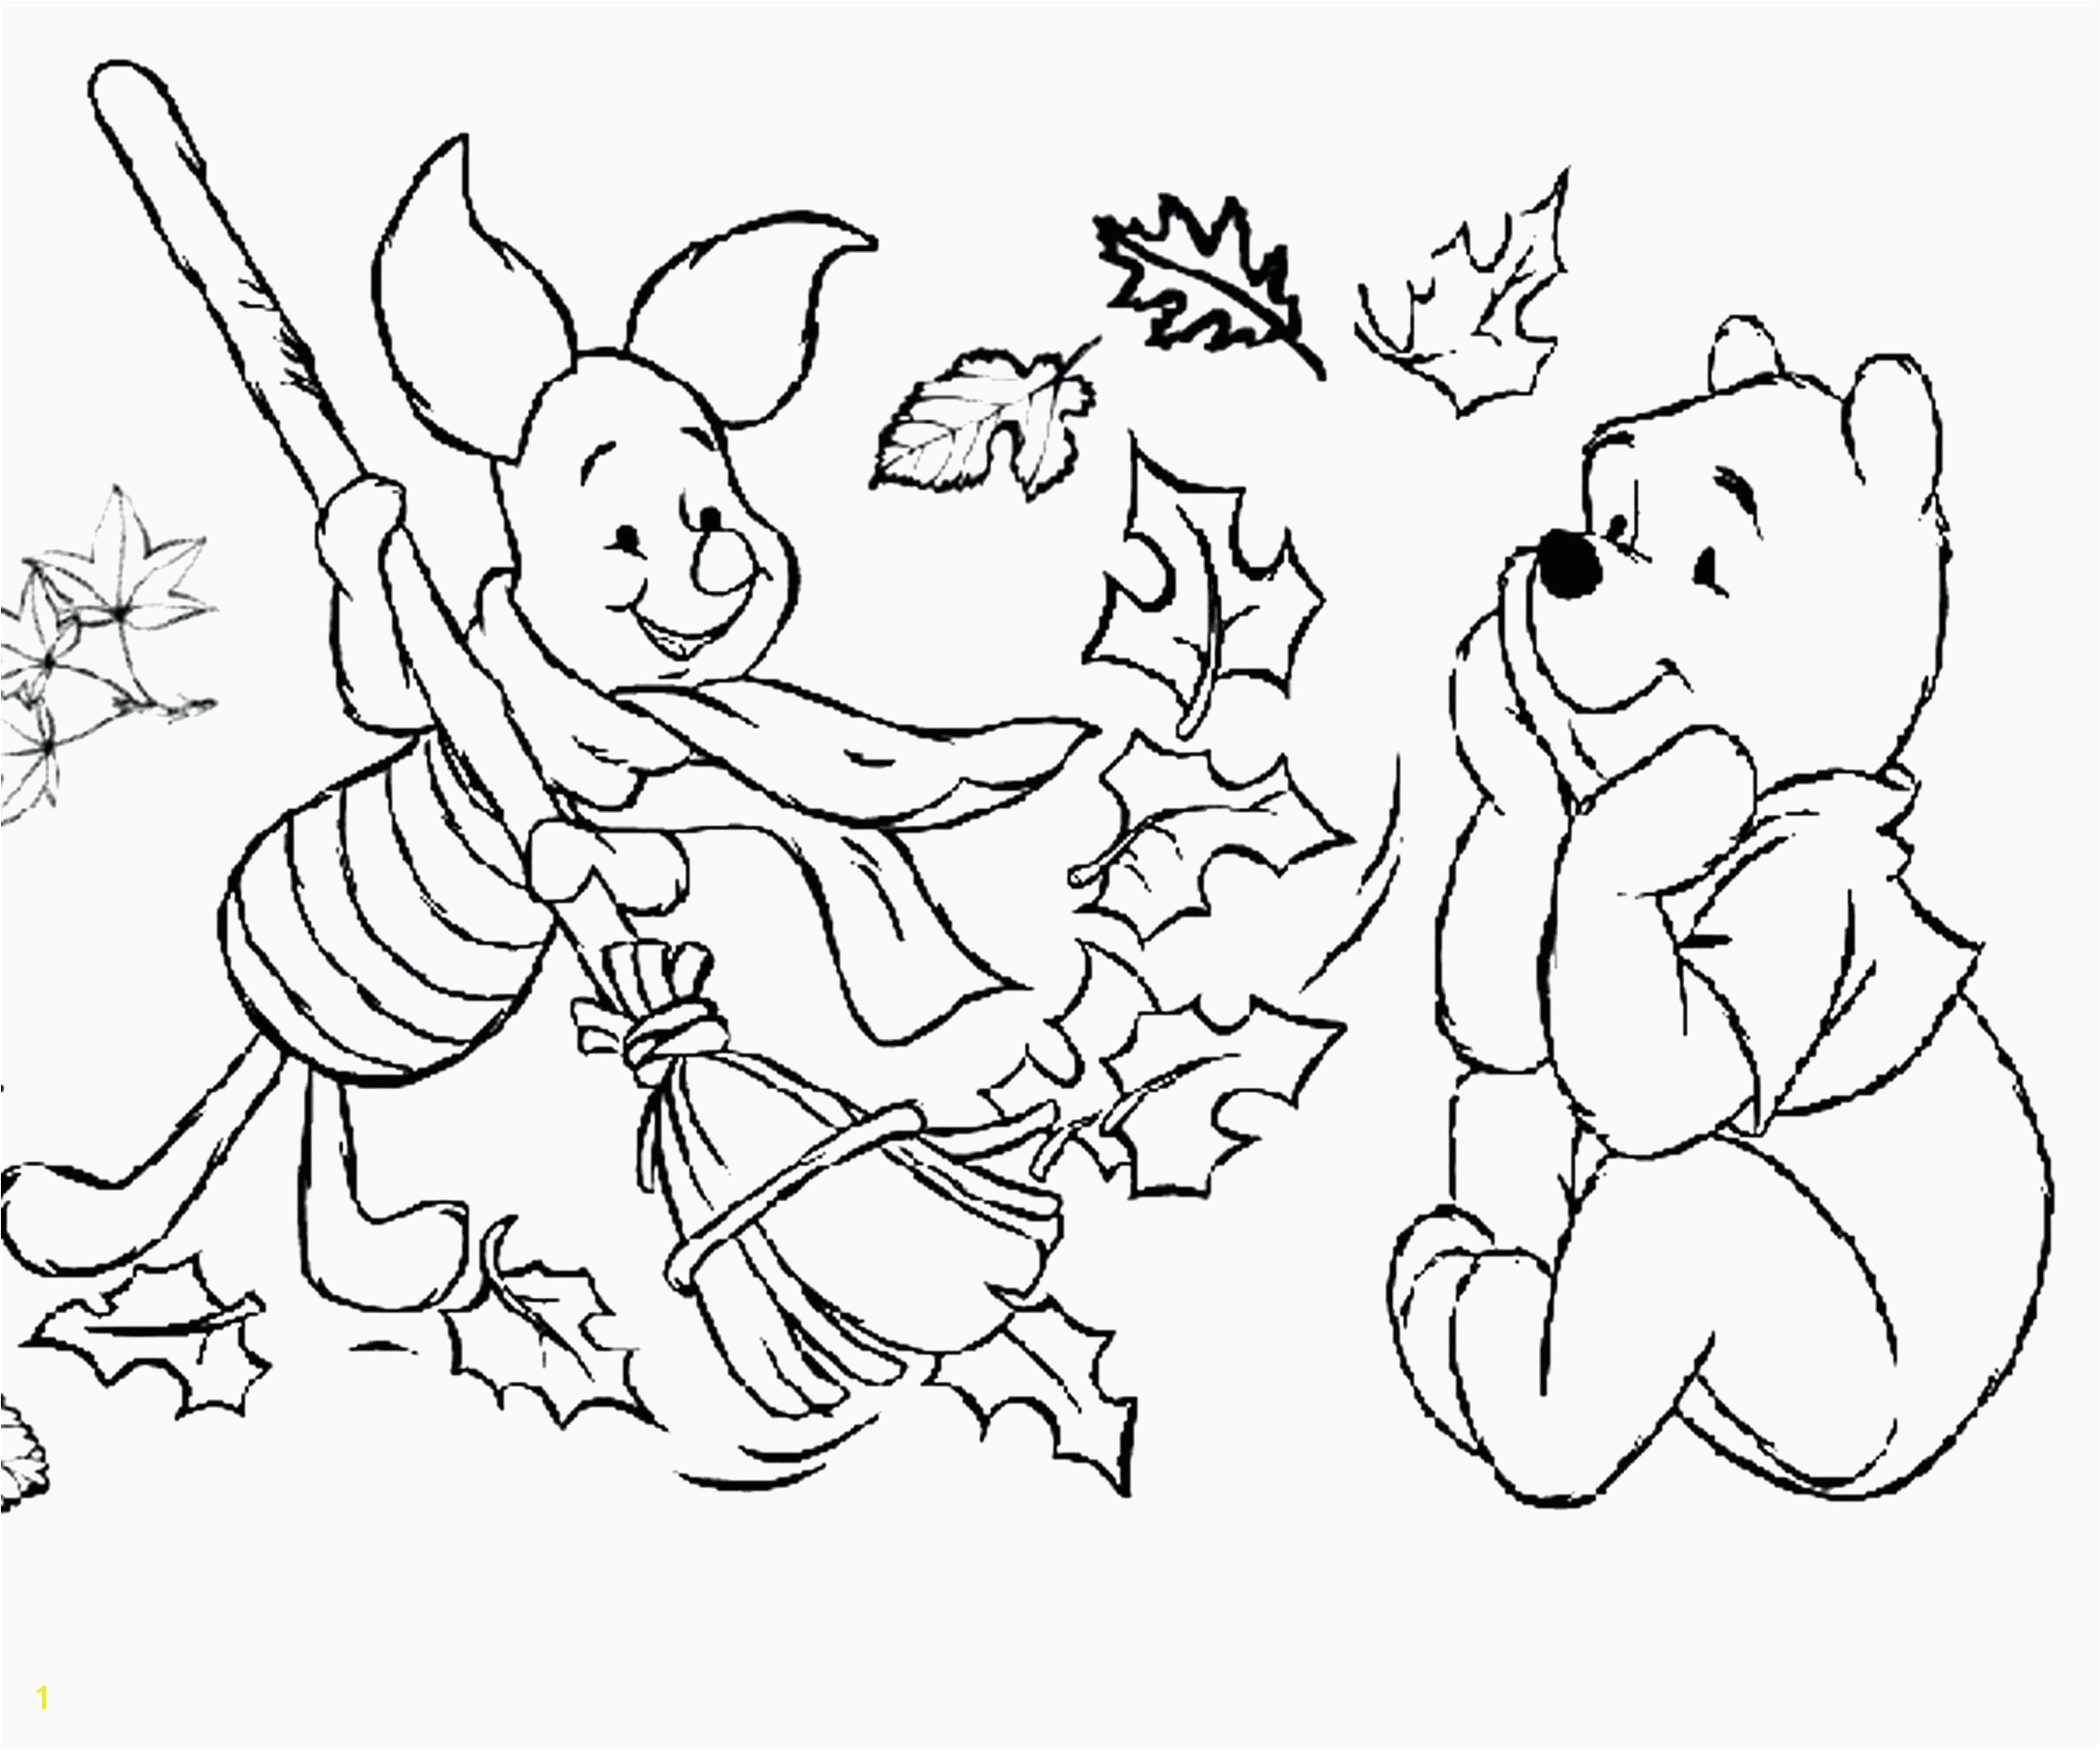 Preschool Halloween Coloring Pages Hello Kitty Halloween Coloring Pages